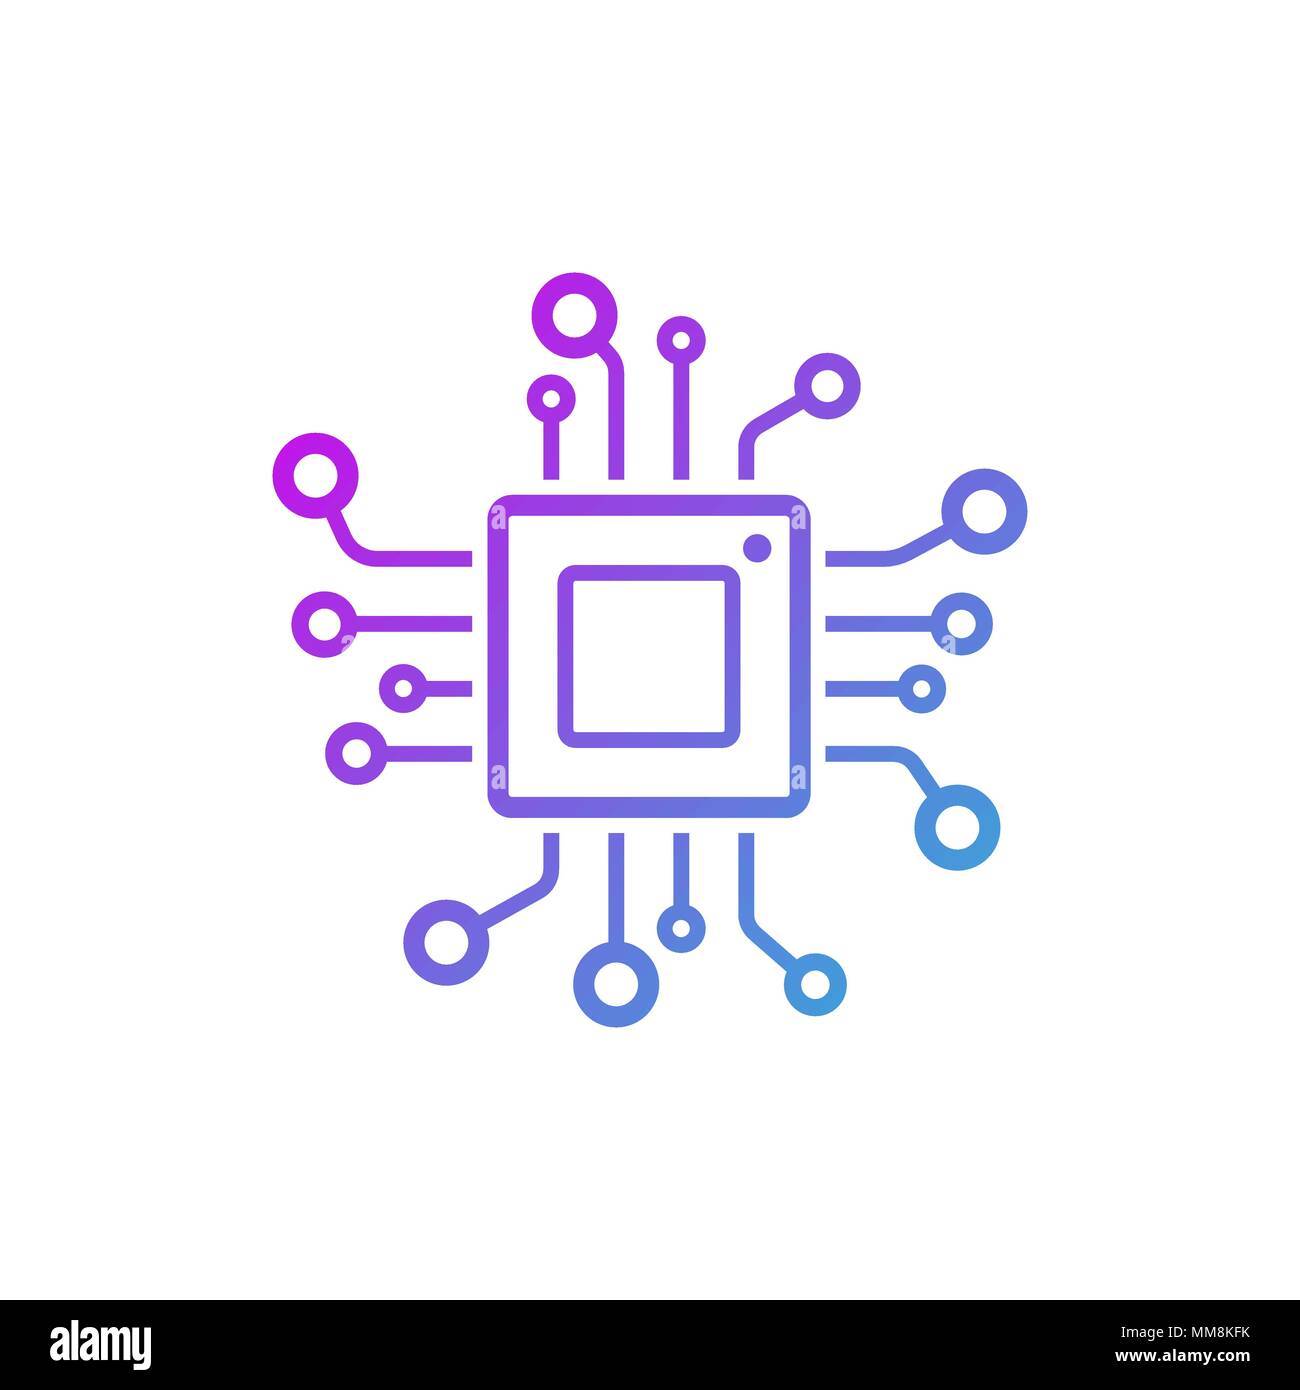 Microchip line icon. CPU, Central processing unit, computer processor, chip symbol in circle. Abstract technology logo. Simple round icon isolated on  Stock Vector